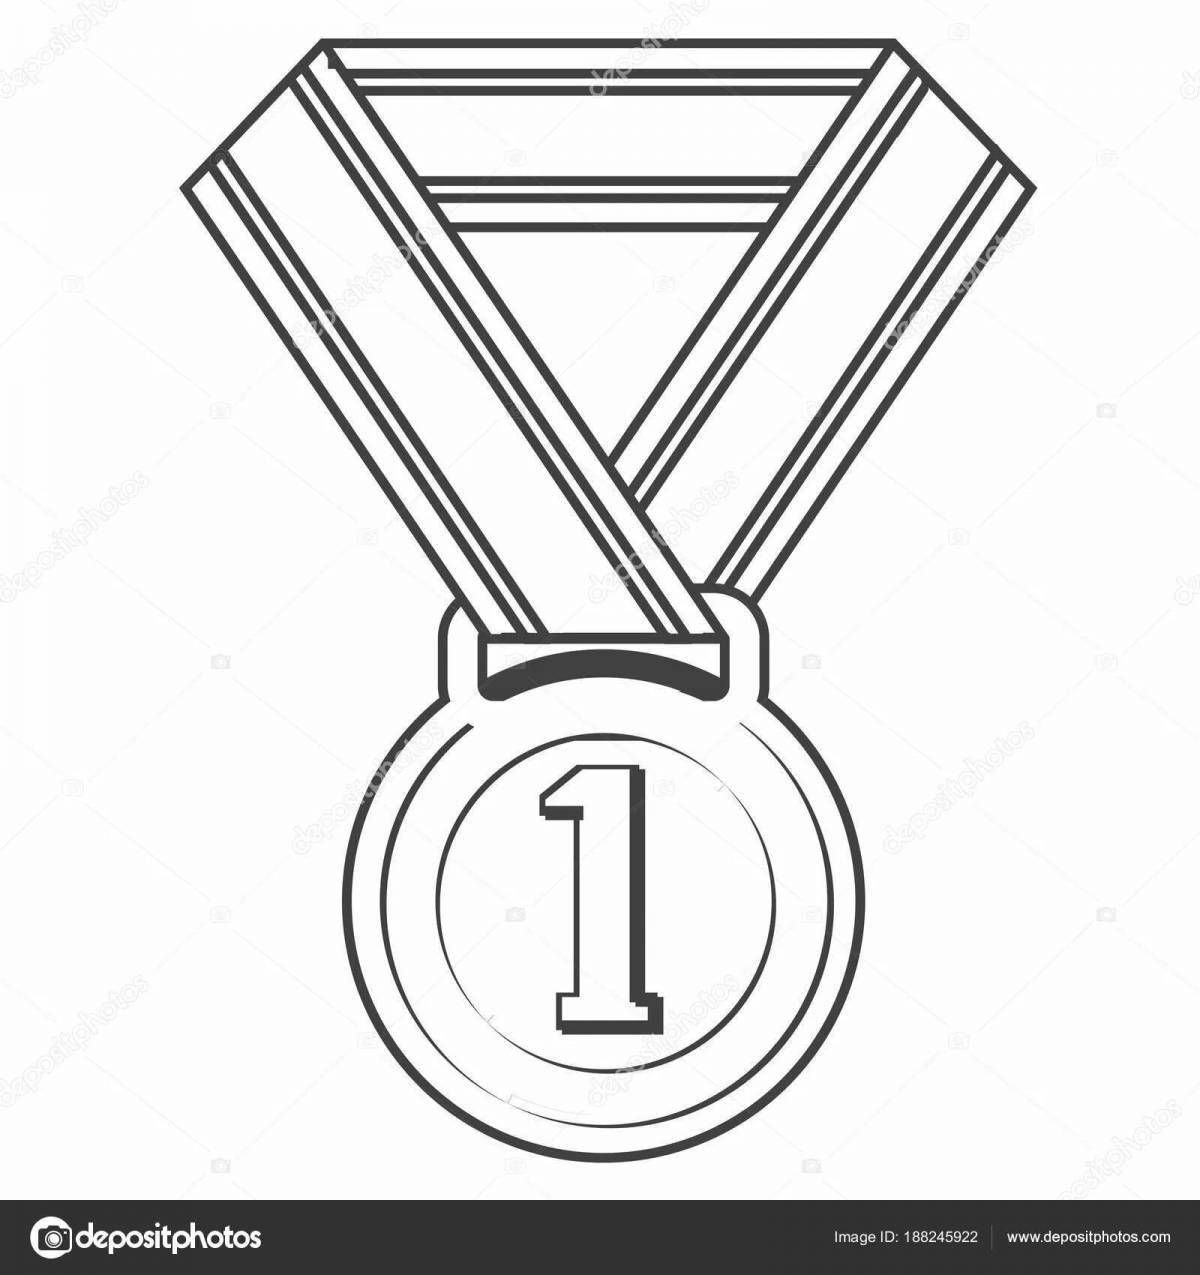 Complex medal coloring page